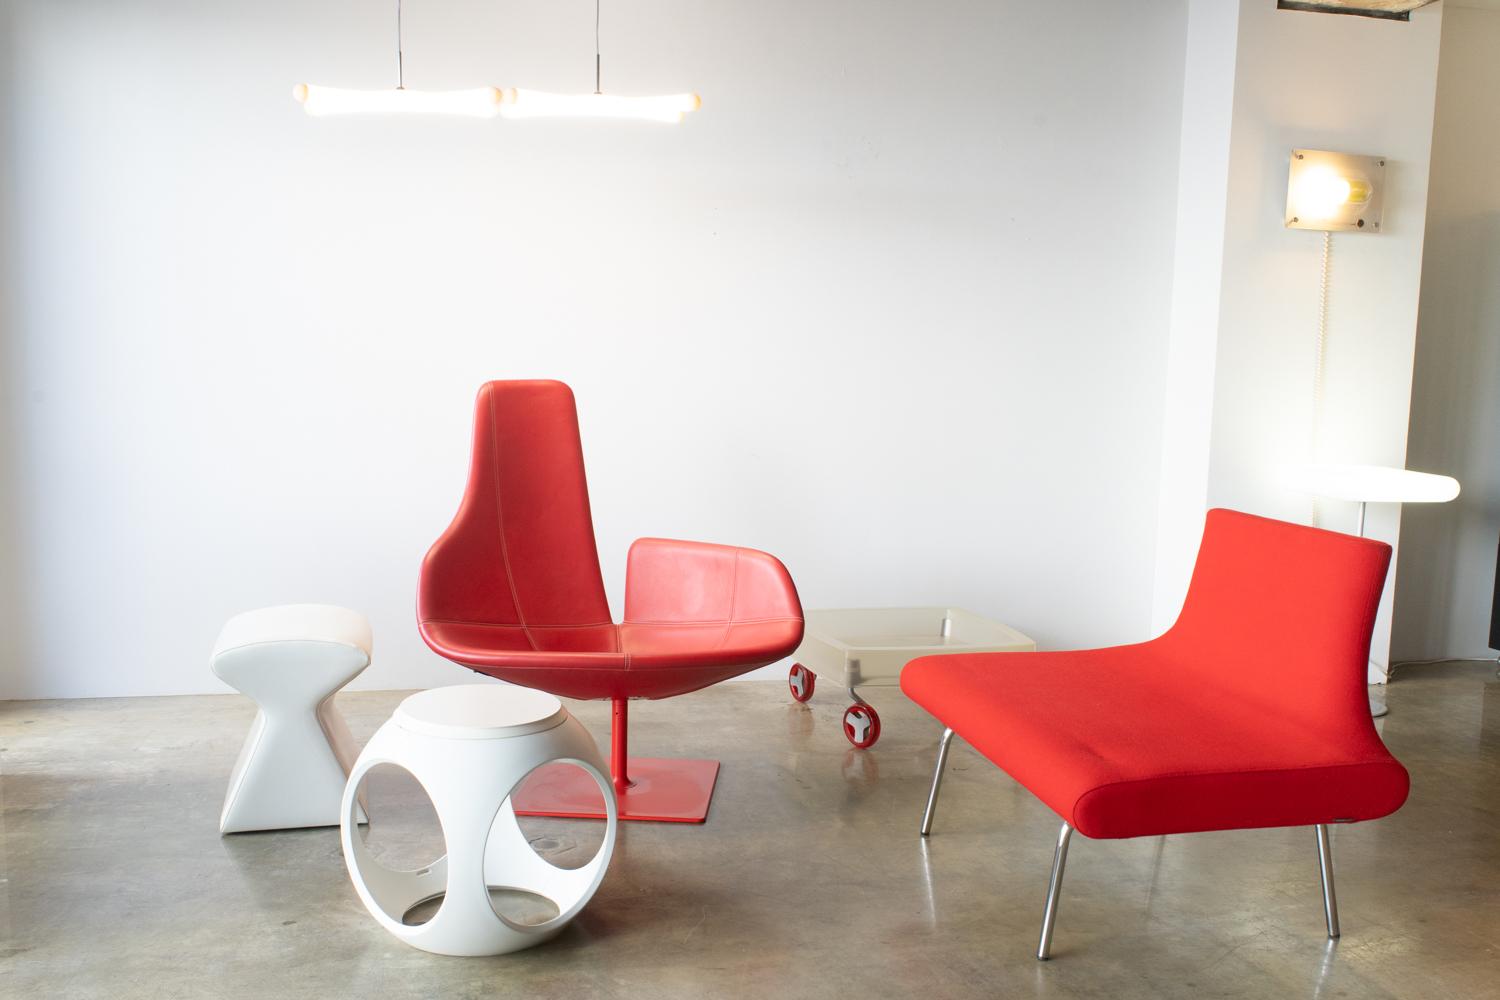 Chair red fabric Orbit sofa Eero Koivisto  Y2K style design space age For Sale 3